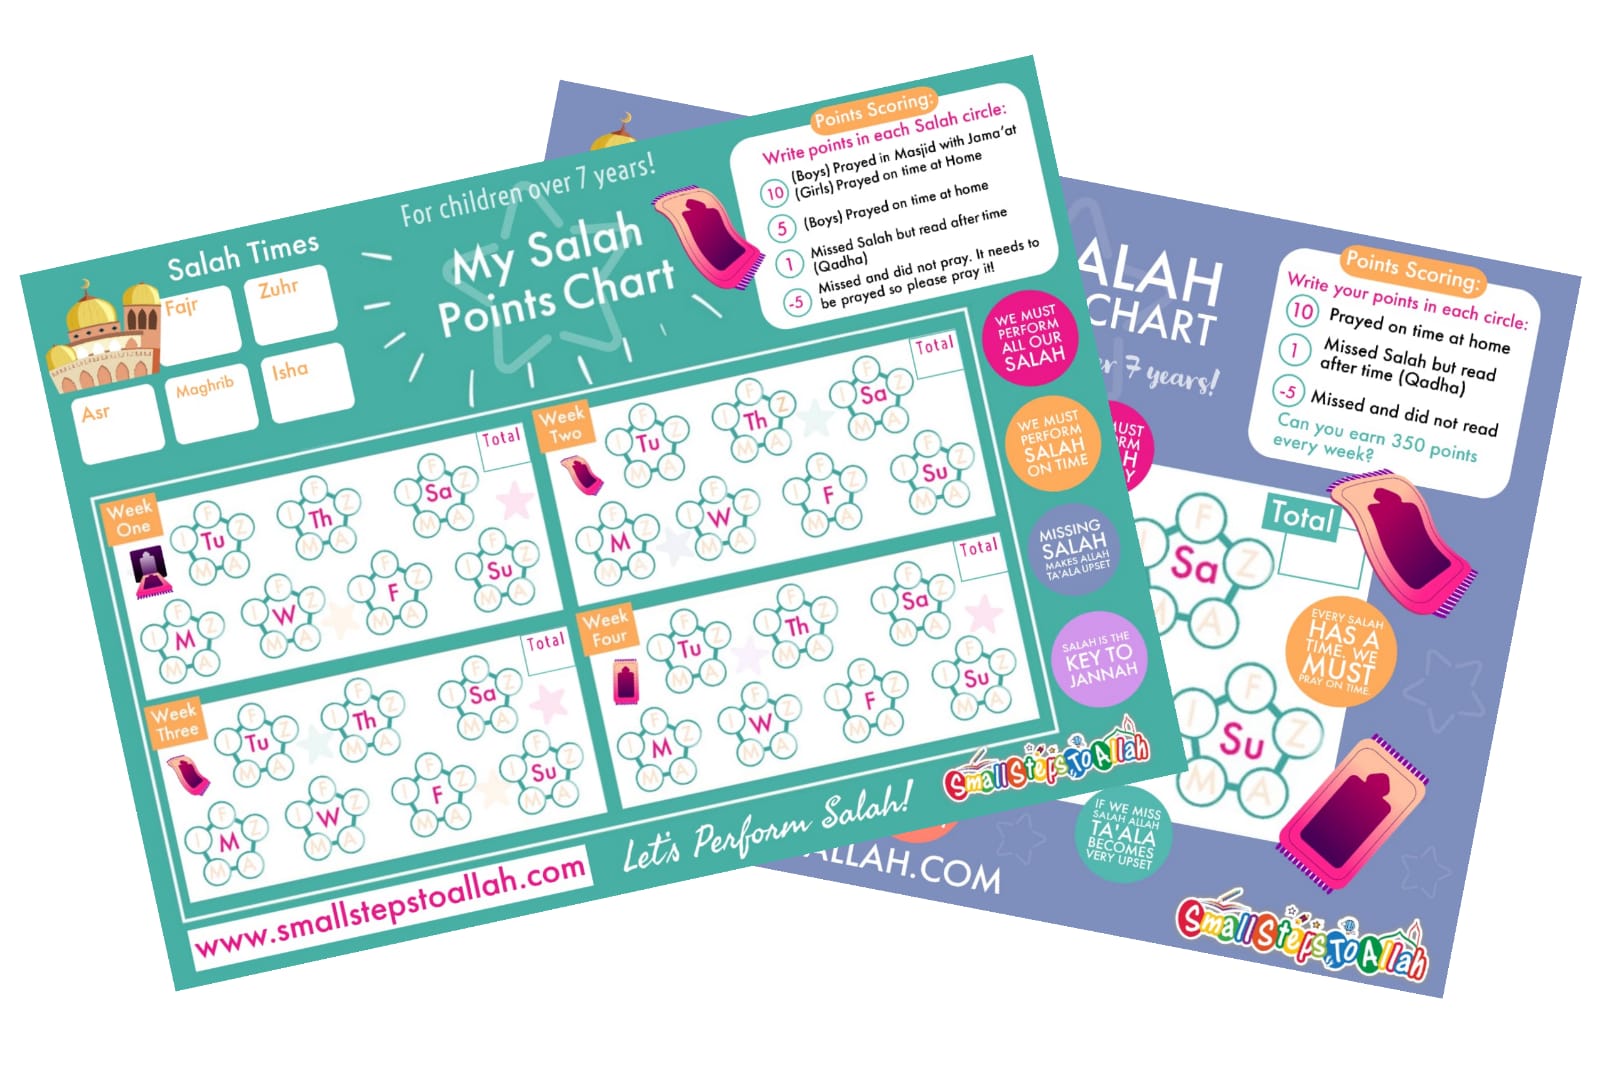 Salah Points Chart Small Steps to Allah